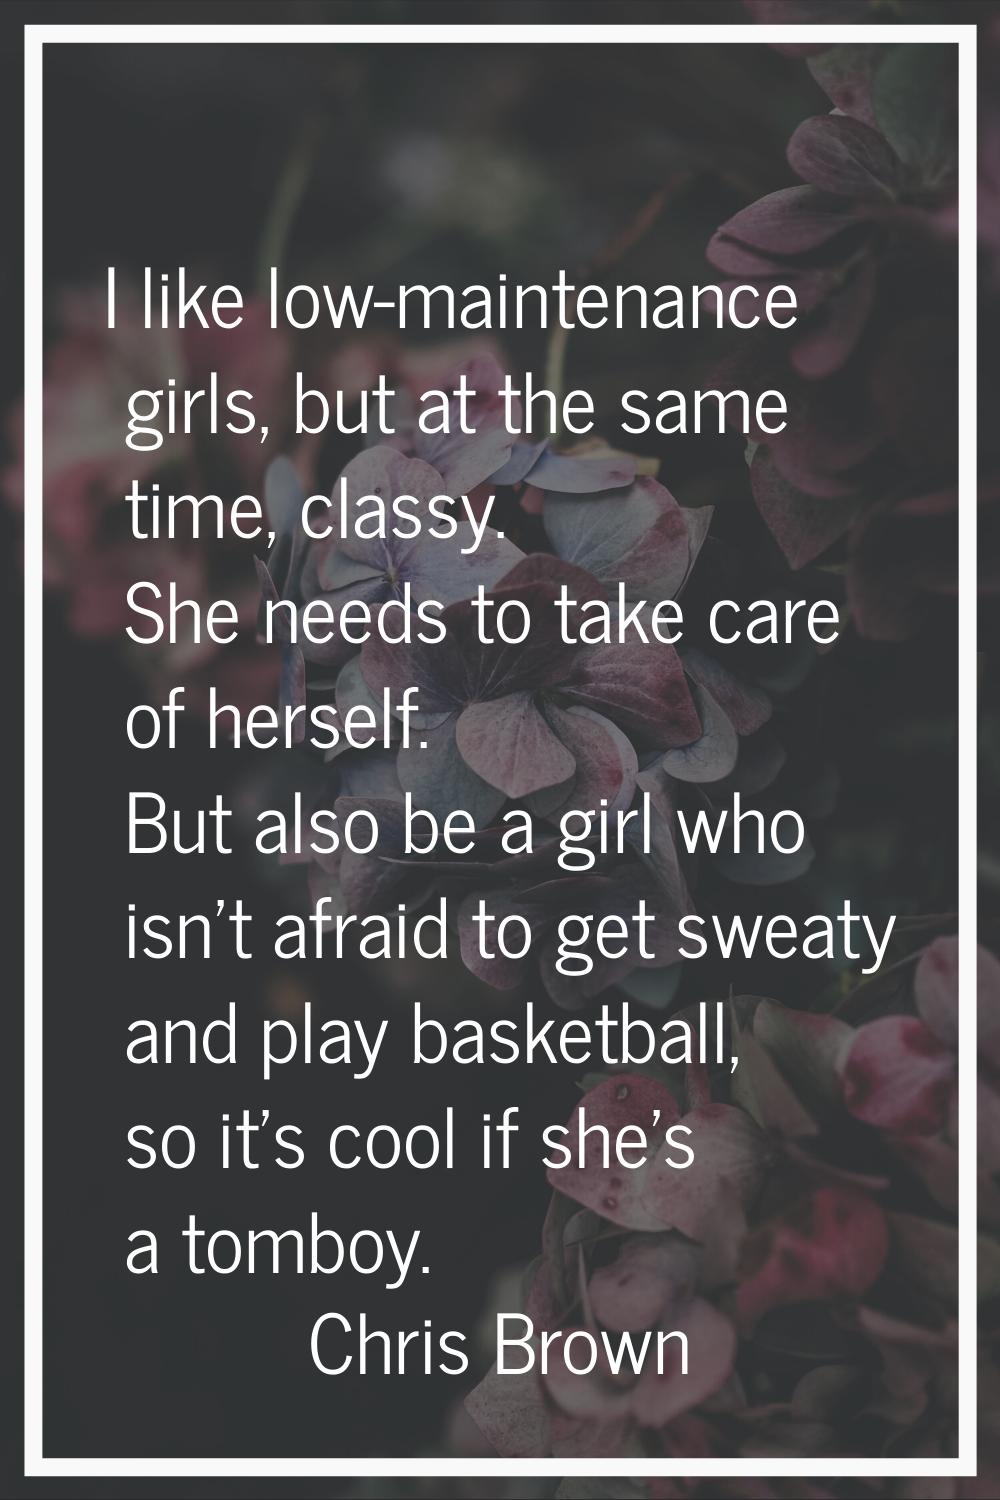 I like low-maintenance girls, but at the same time, classy. She needs to take care of herself. But 